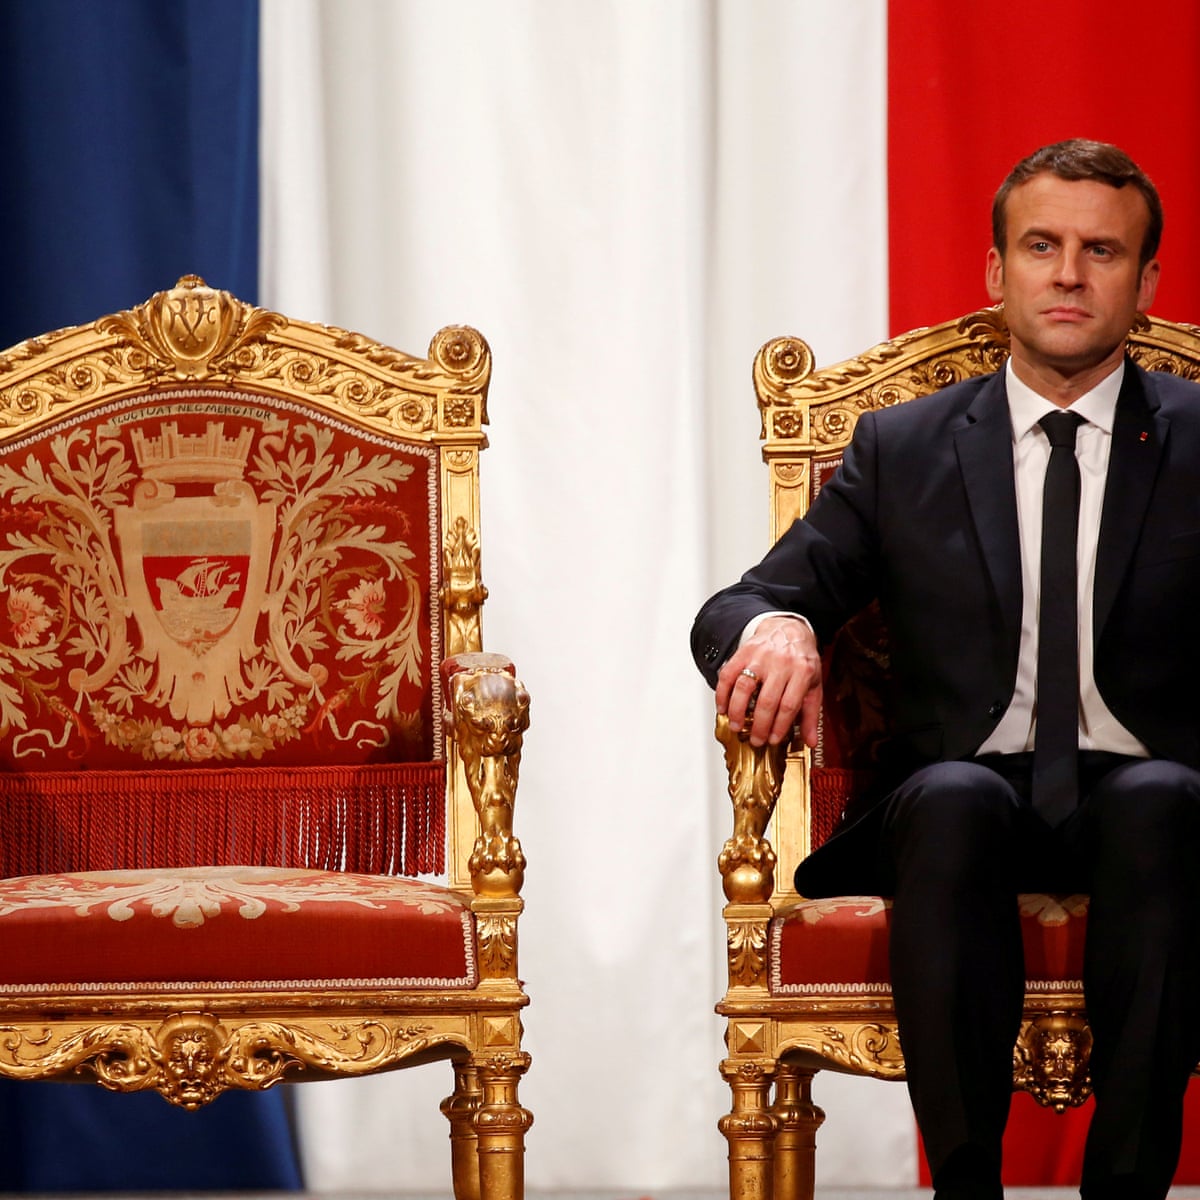 Jupiter' or just another politician? Macron's divine aura begins to fade | Emmanuel  Macron | The Guardian